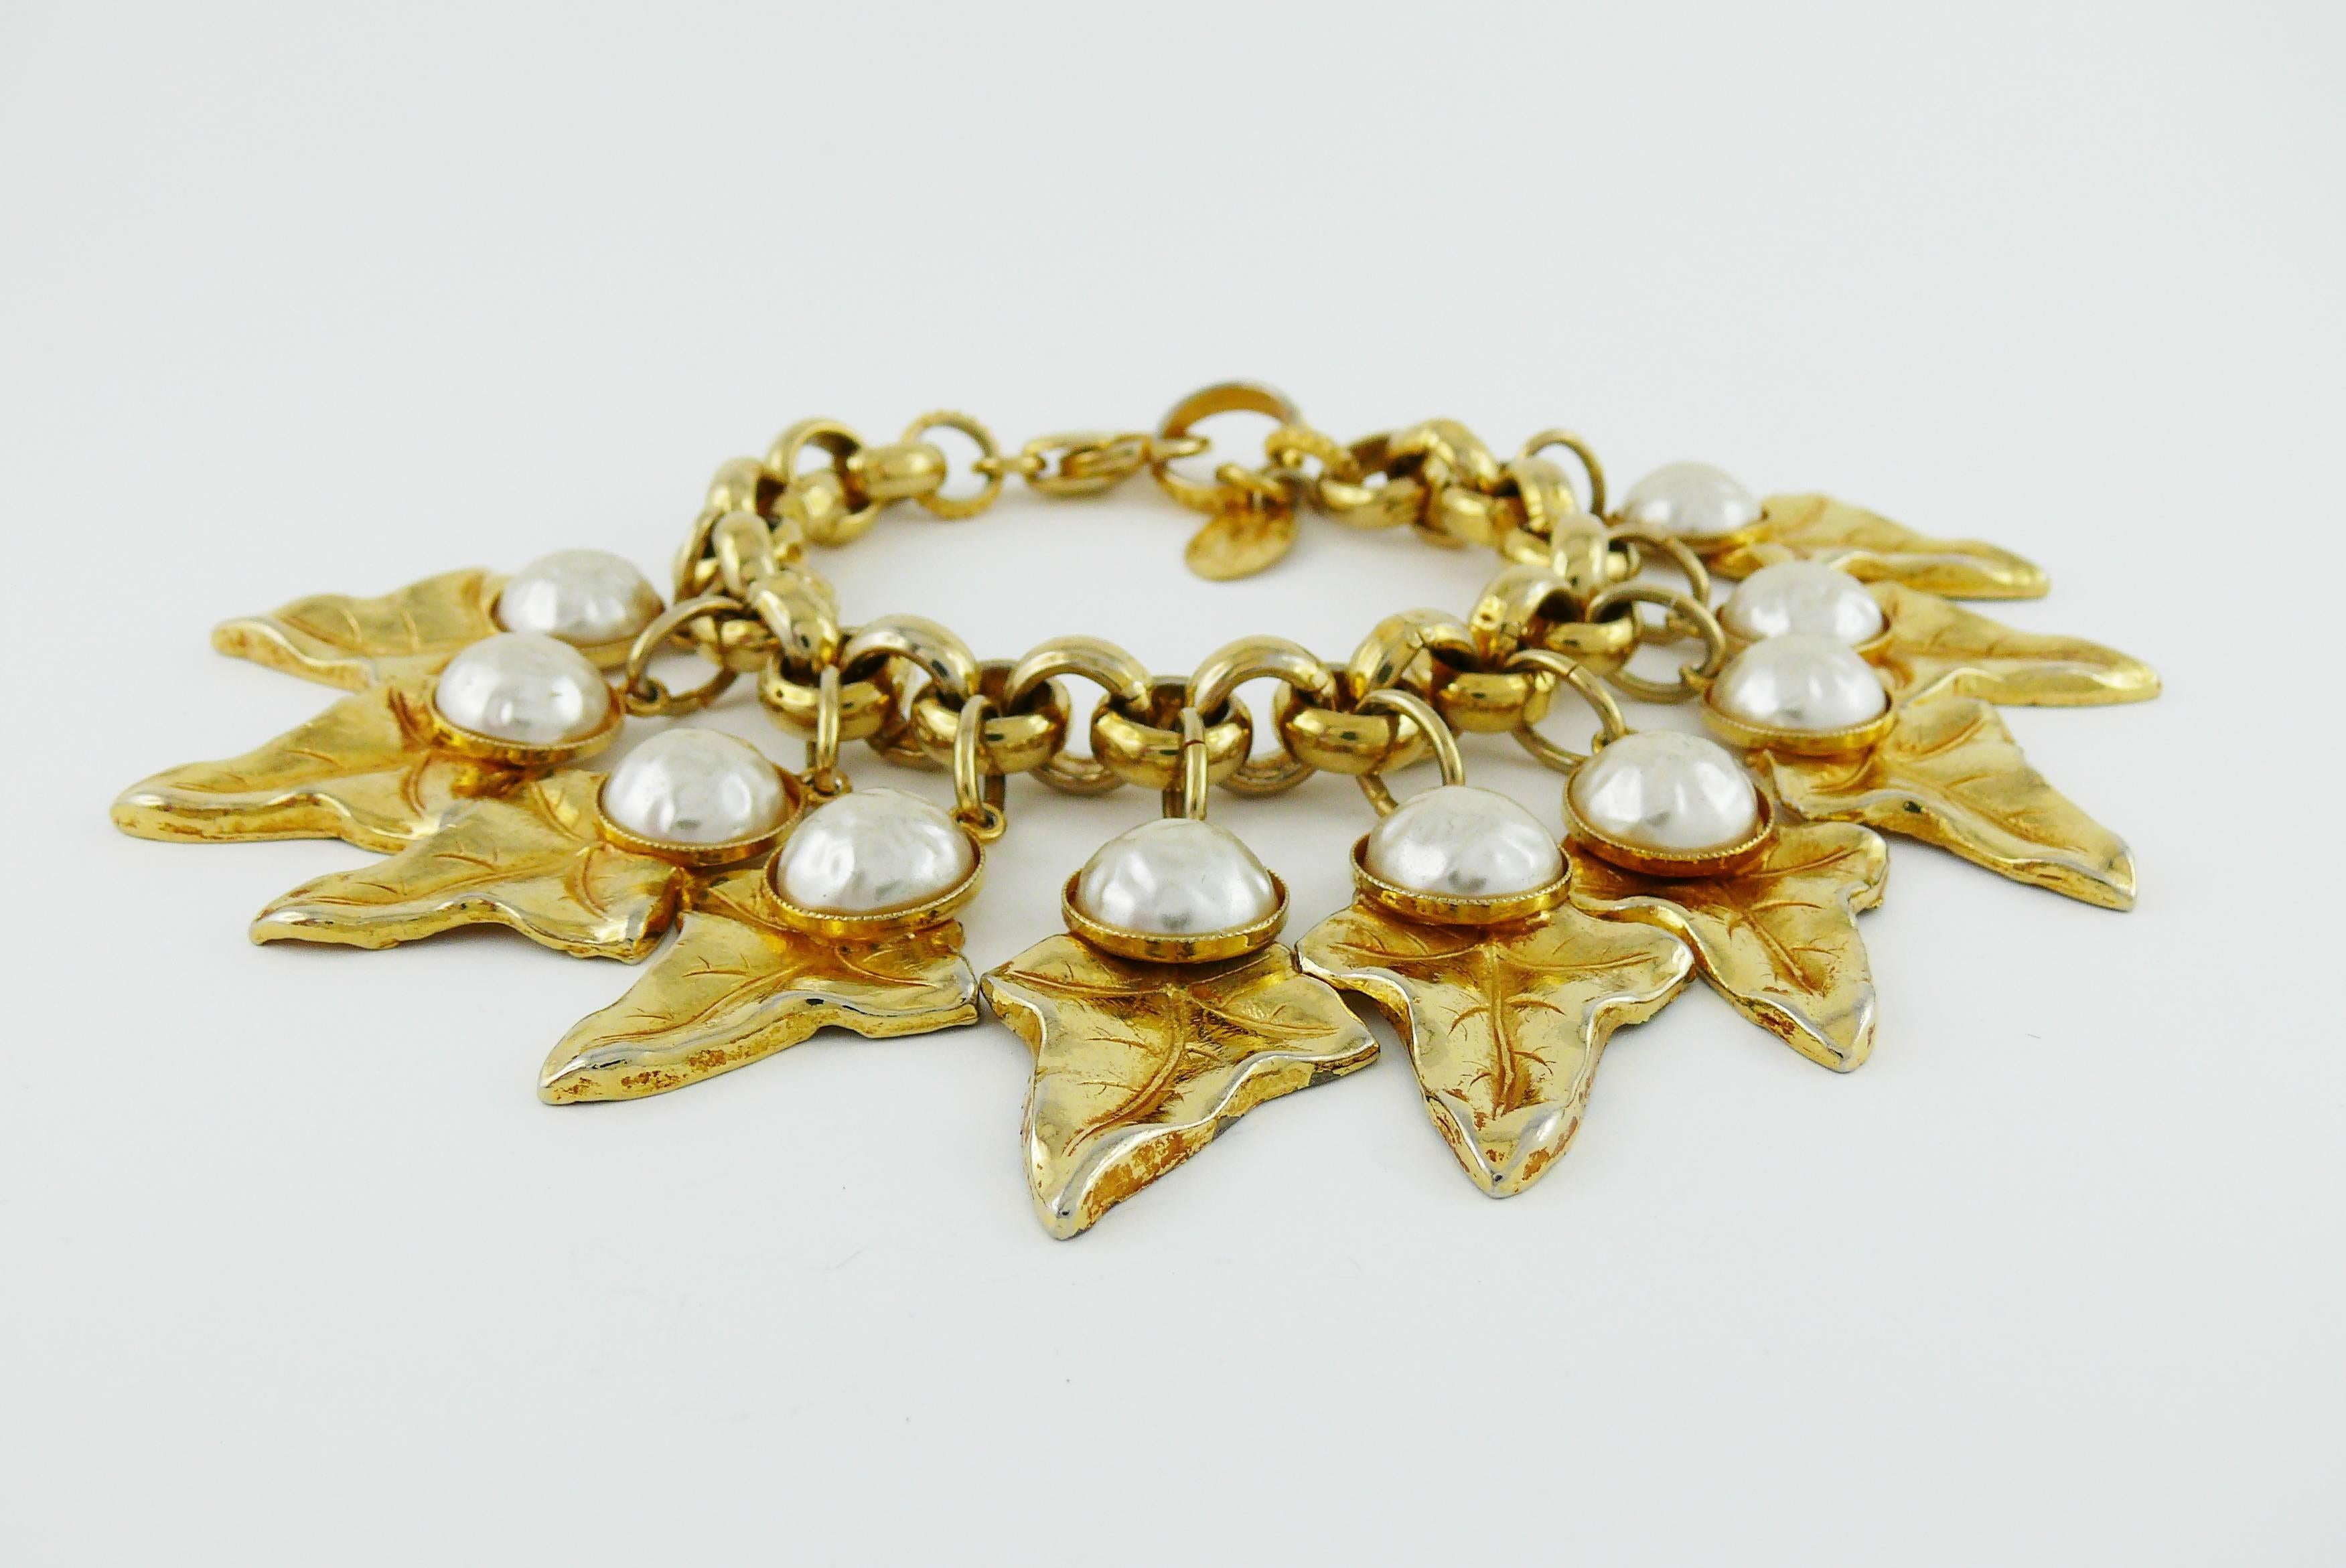 PHILLIPE FERRANDIS Paris vintage gold toned link bracelet featuring foliage charms embellished with faux pearls.

Signed PHILIPPE FERRANDIS Paris.

Lobster clasp closure.

Indicative measurements : length approx. 18.5 cm (7.28 inches) / width approx